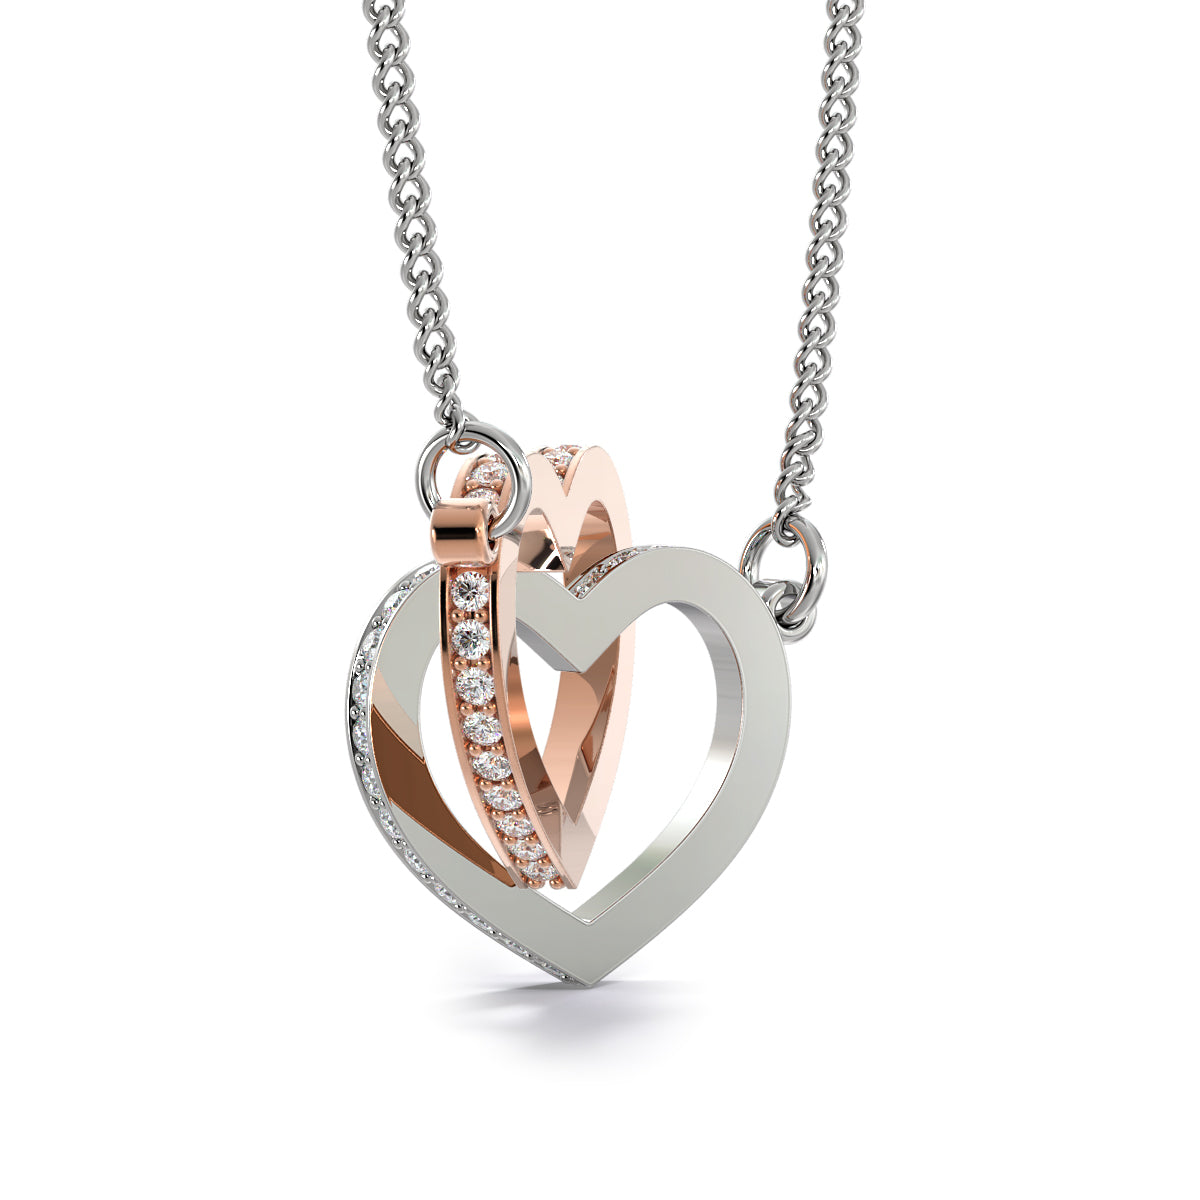 Interlocking Hearts Necklace, Gift to Mom from Daughter